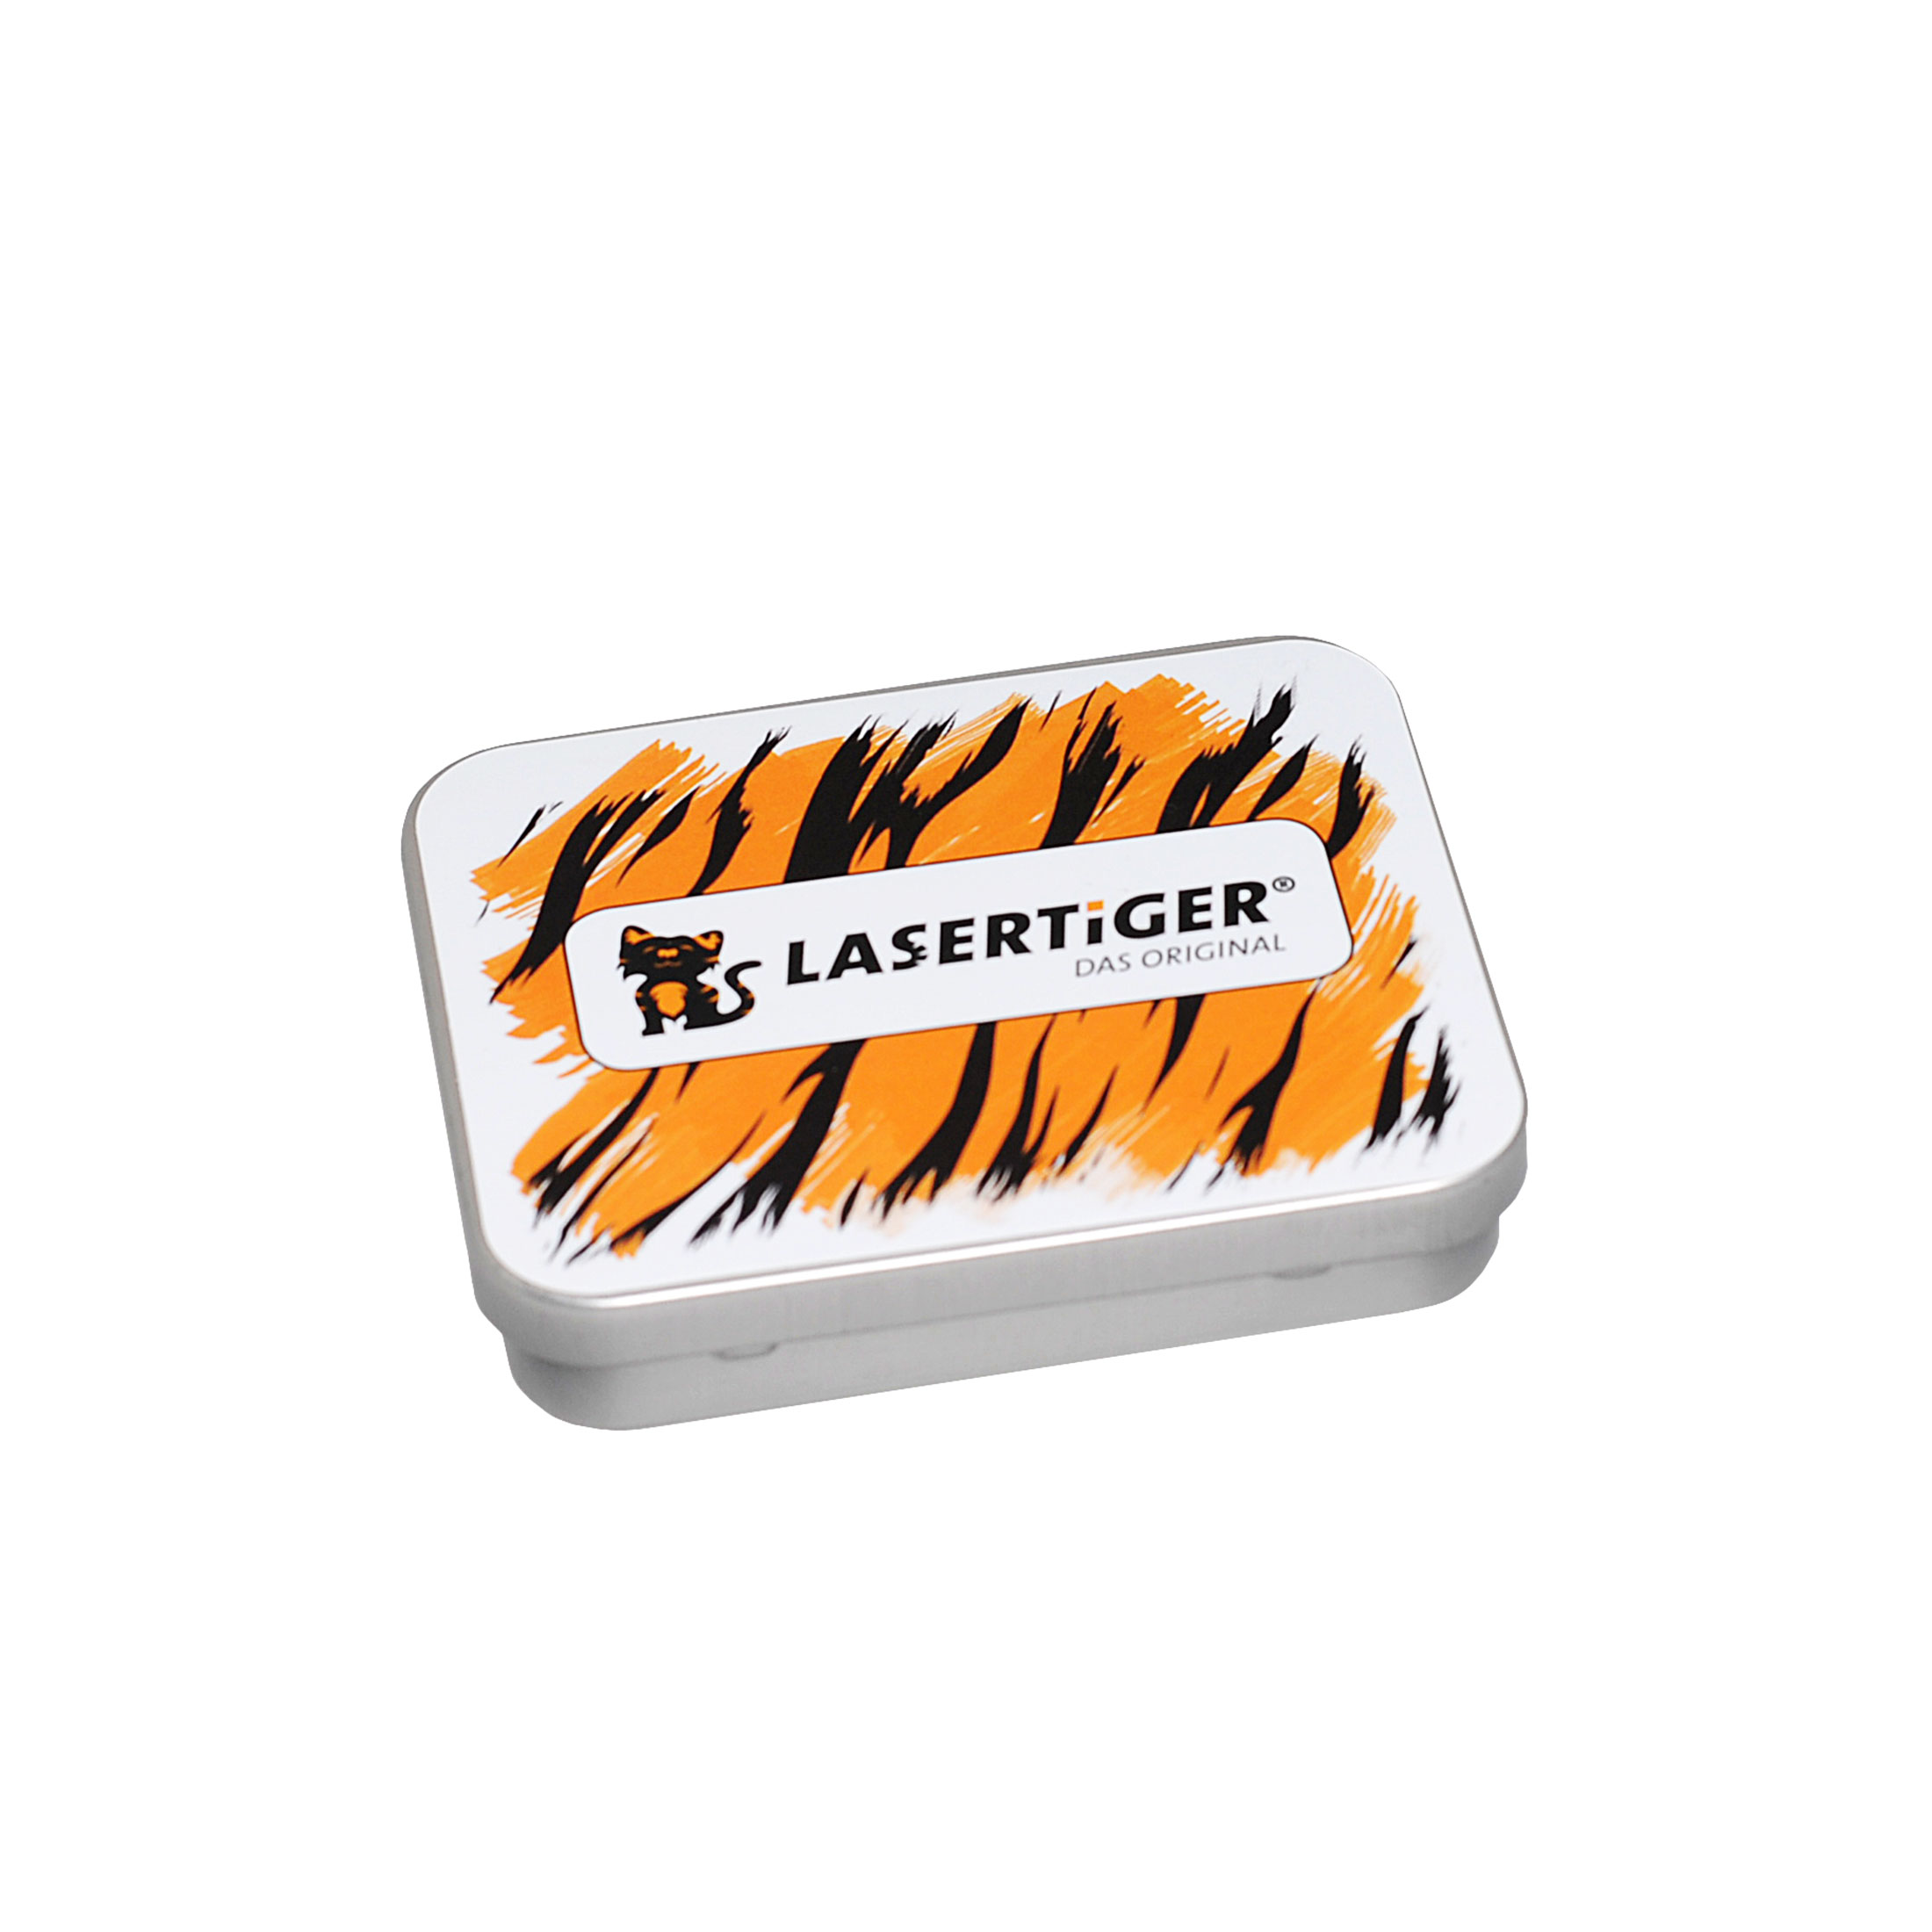 LASERTIGER interactive and eye-safe cat toy for playing, hunting and fitness - great fun and exerci…